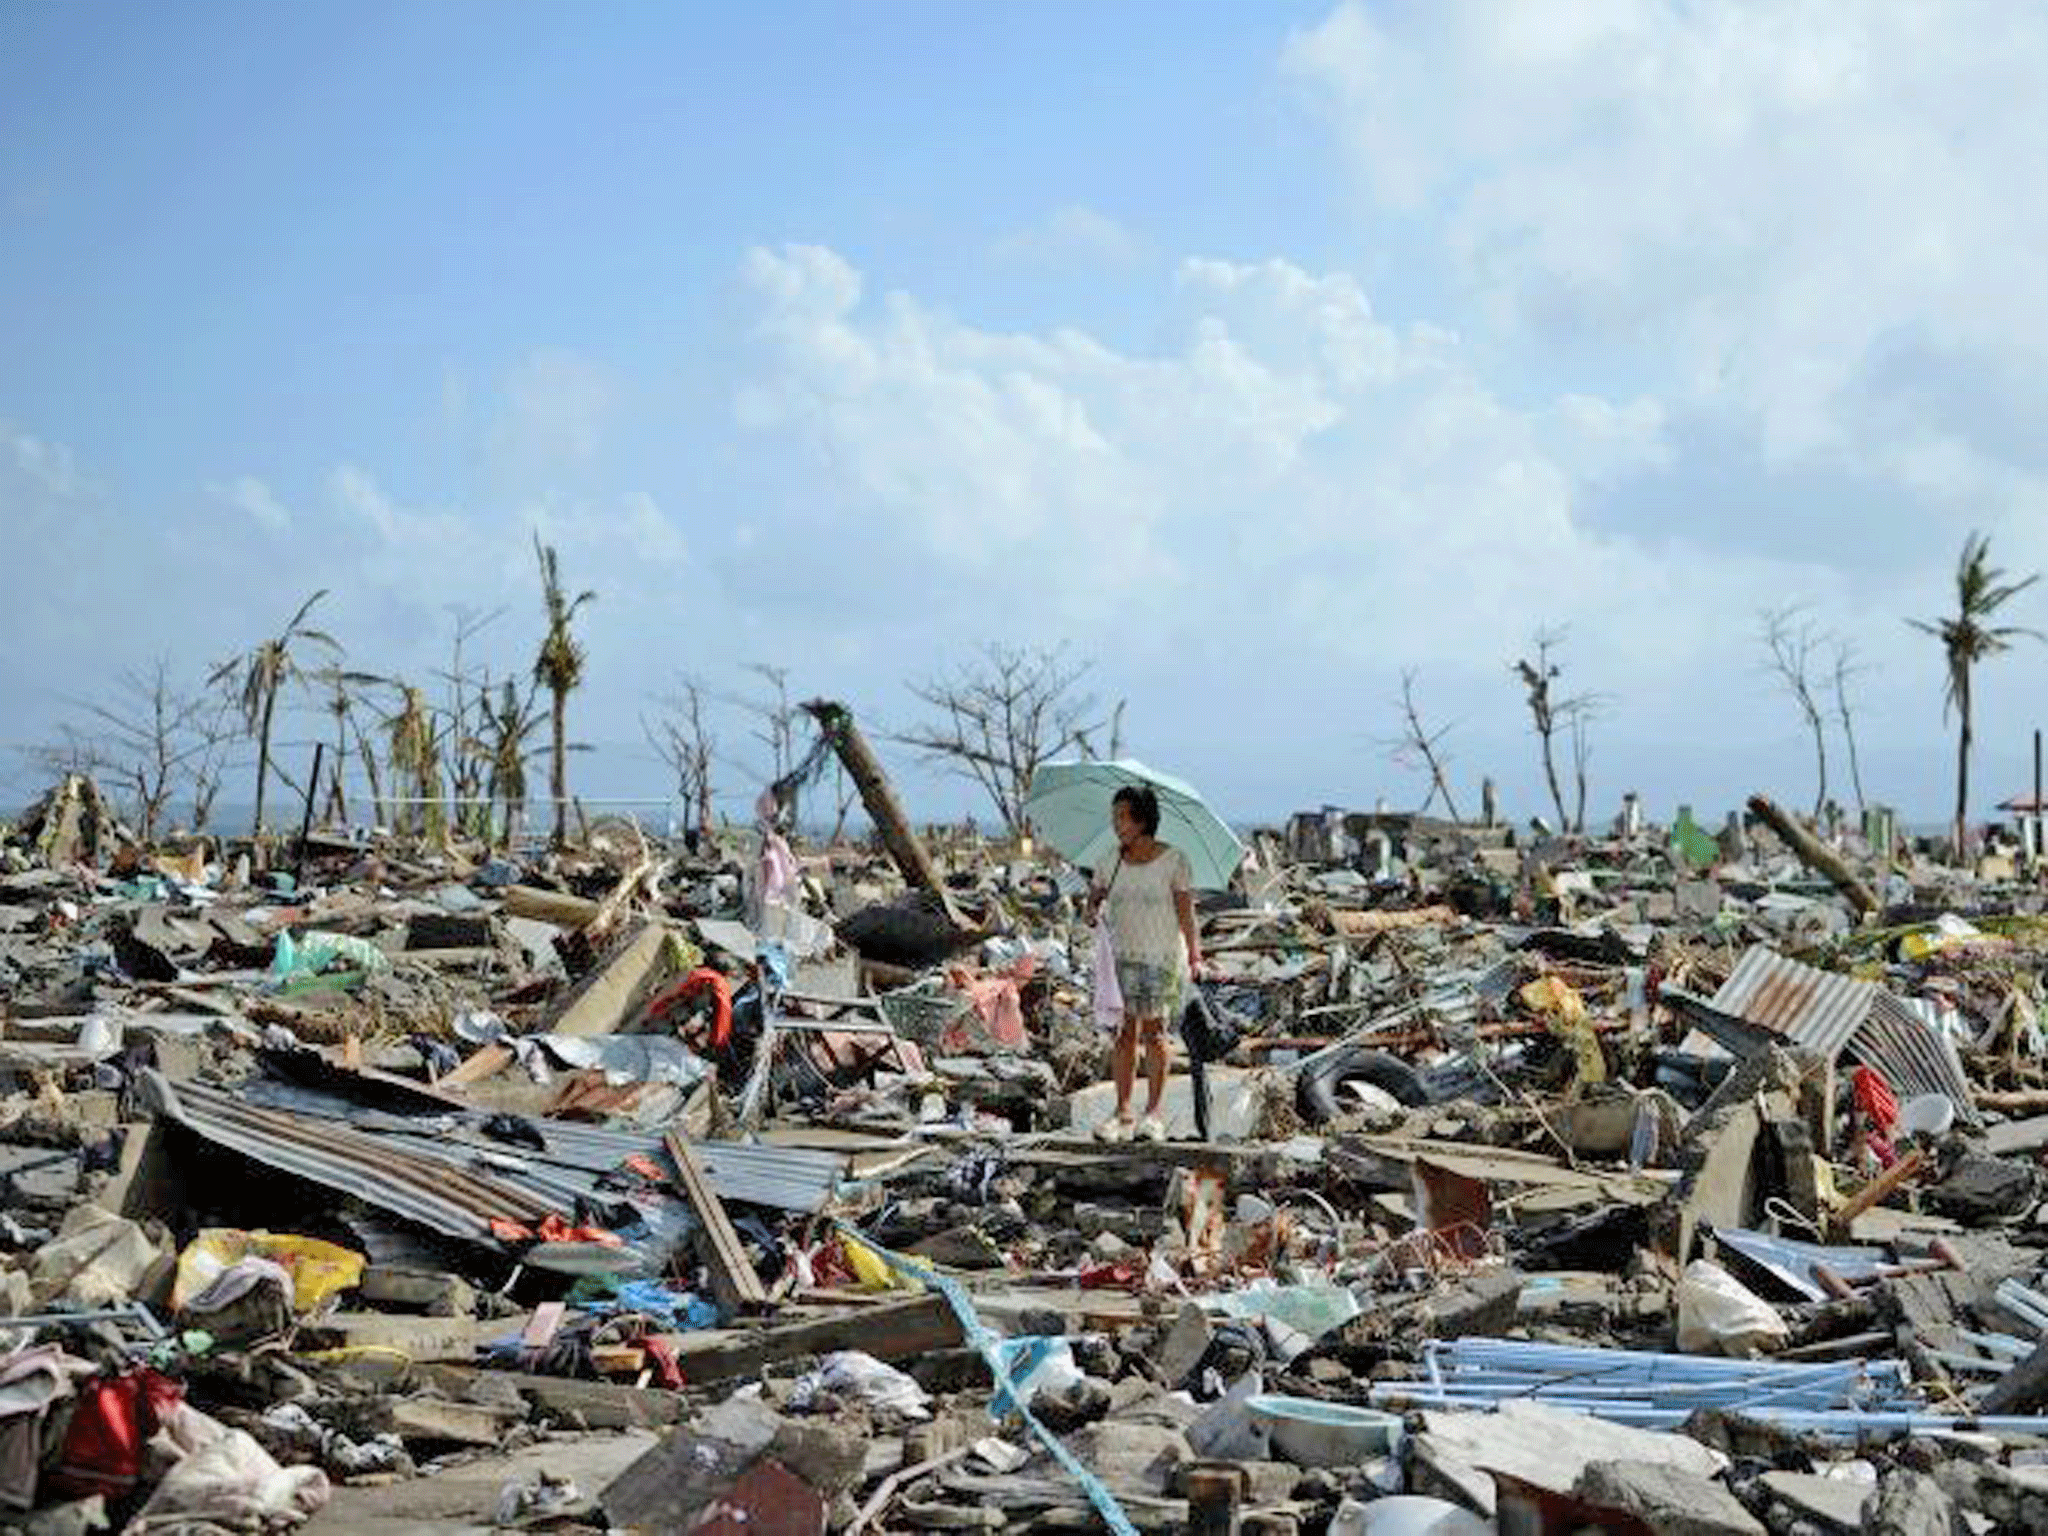 A survivor walks among the debris of houses destroyed by Super Typhoon Haiyan in Tacloban in the eastern Philippine island of Leyte on November 11, 2013